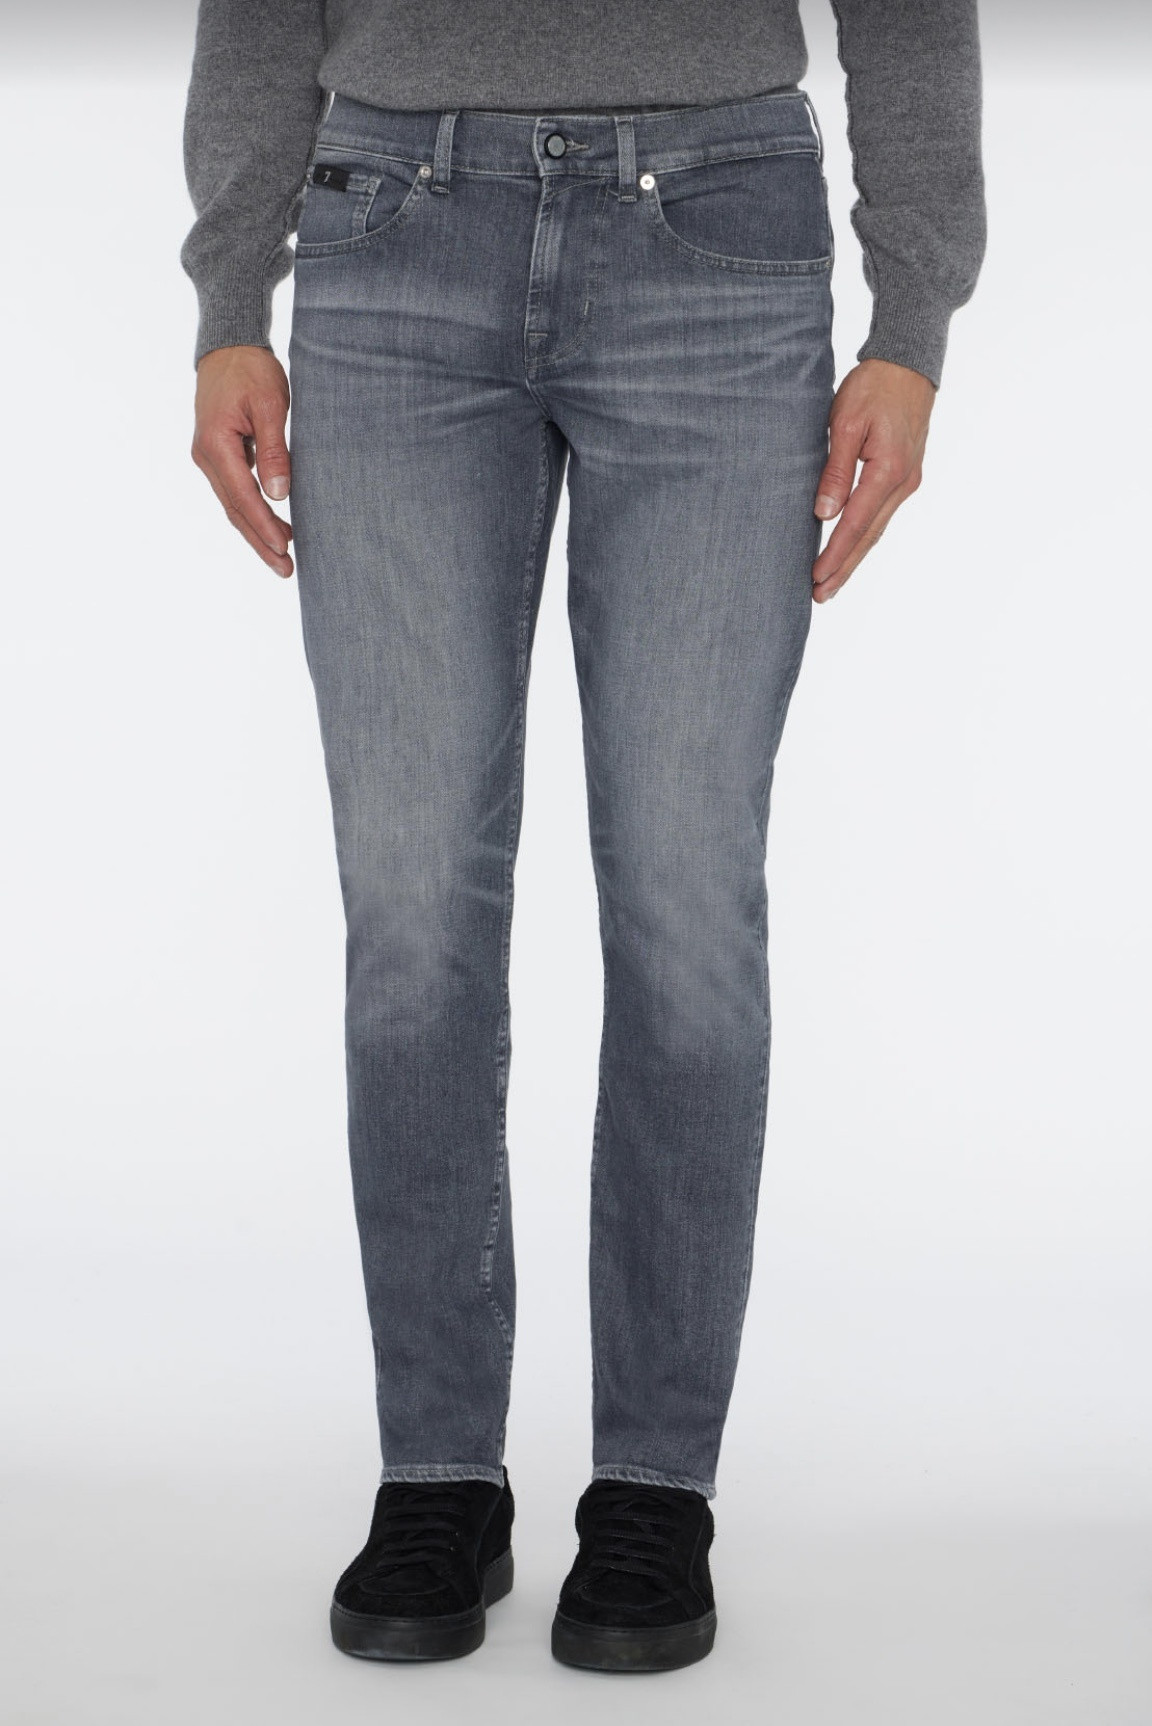 Afbeelding van 7 For All Mankind Slimmy tapered special edition stretch tek pristine